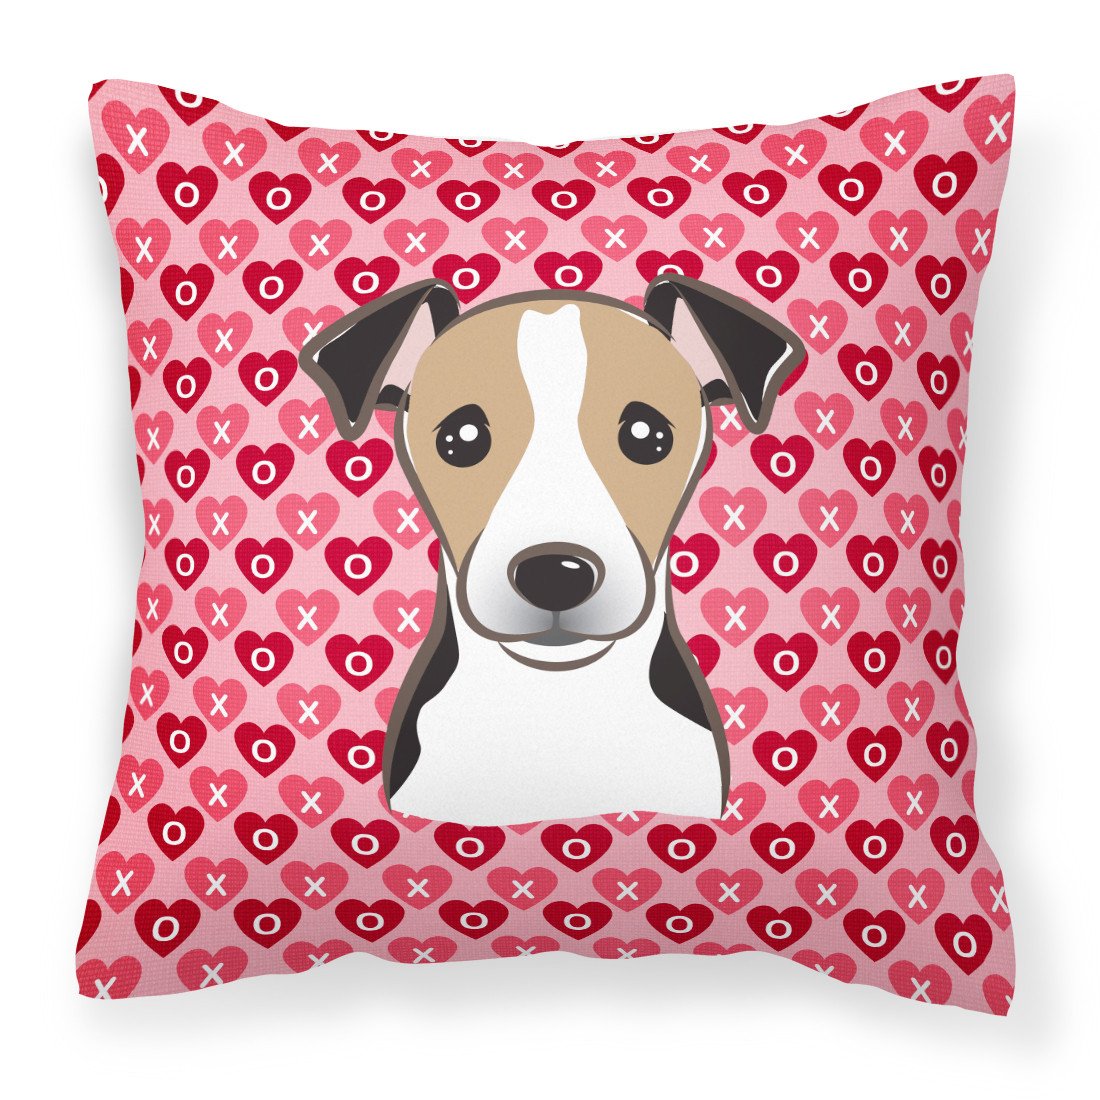 Jack Russell Terrier Hearts Fabric Decorative Pillow BB5331PW1818 by Caroline's Treasures